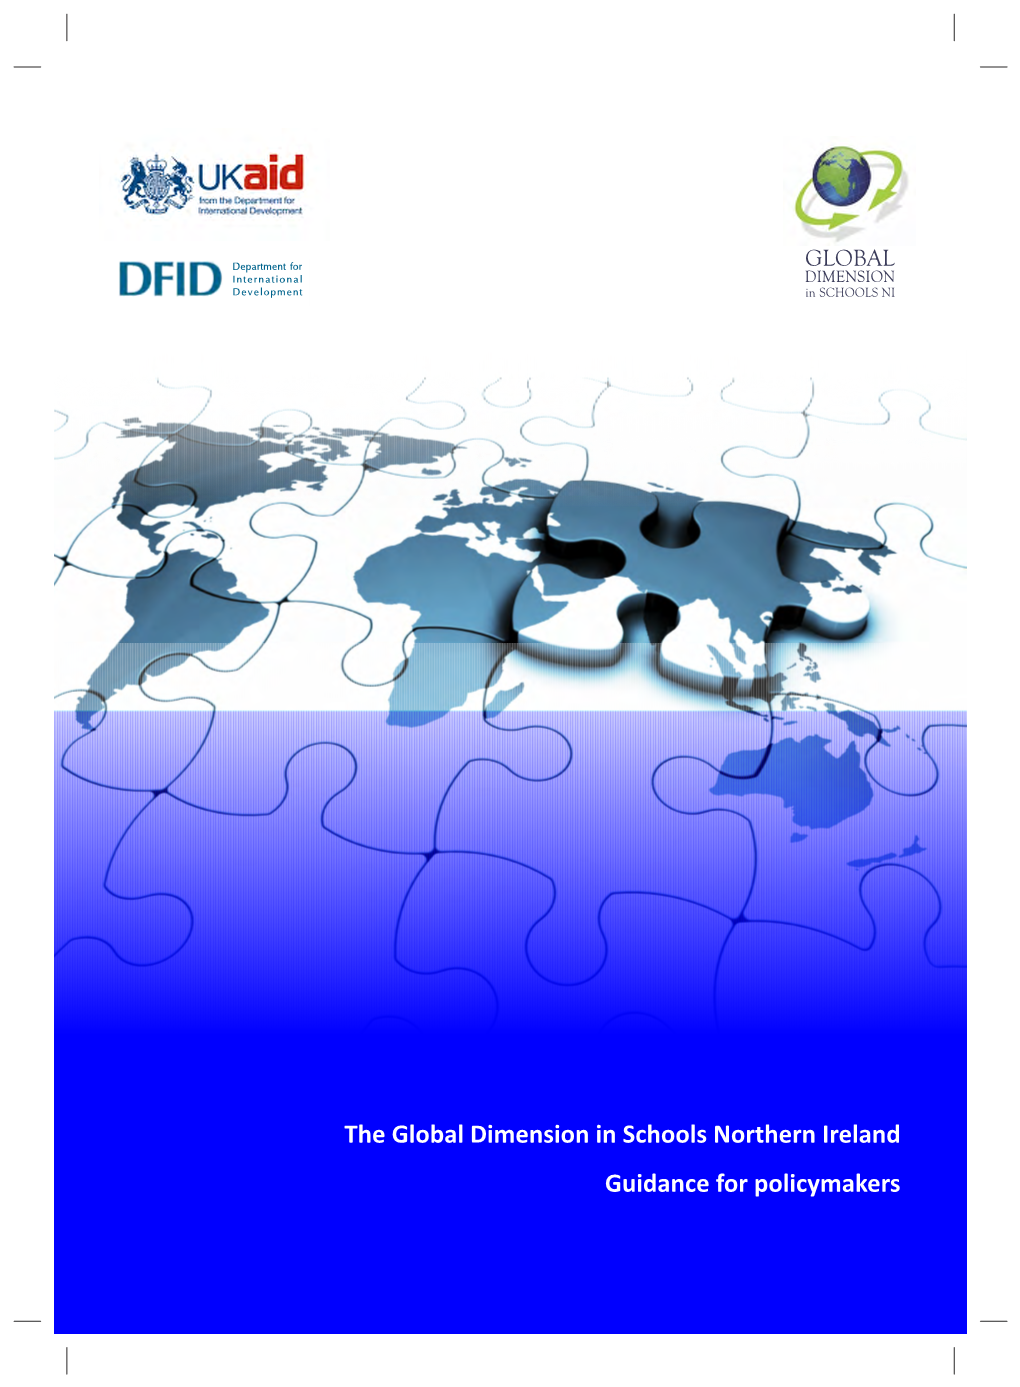 The Global Dimension in Schools Northern Ireland Guidance for Policymakers a Global Dimension in Schools